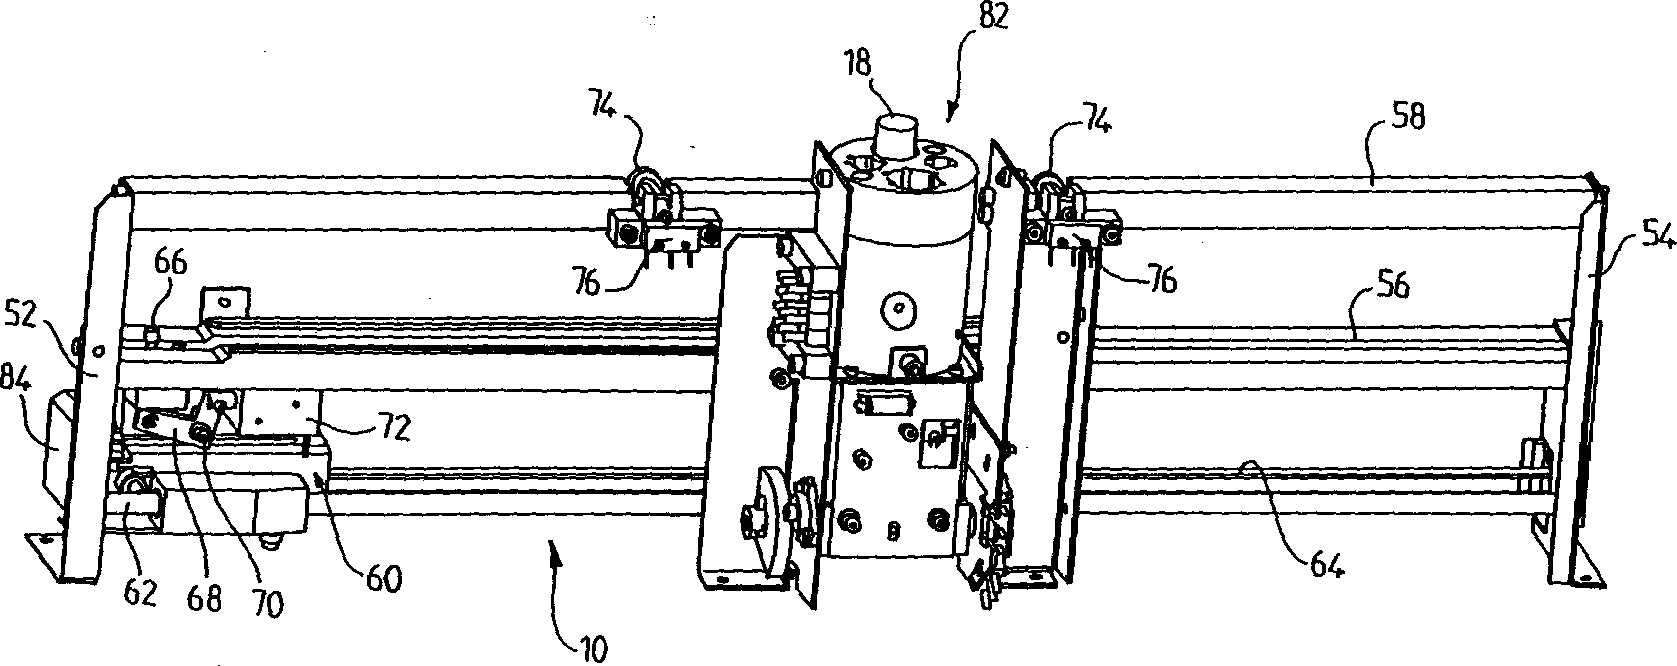 Device for treatment of sample of blood products